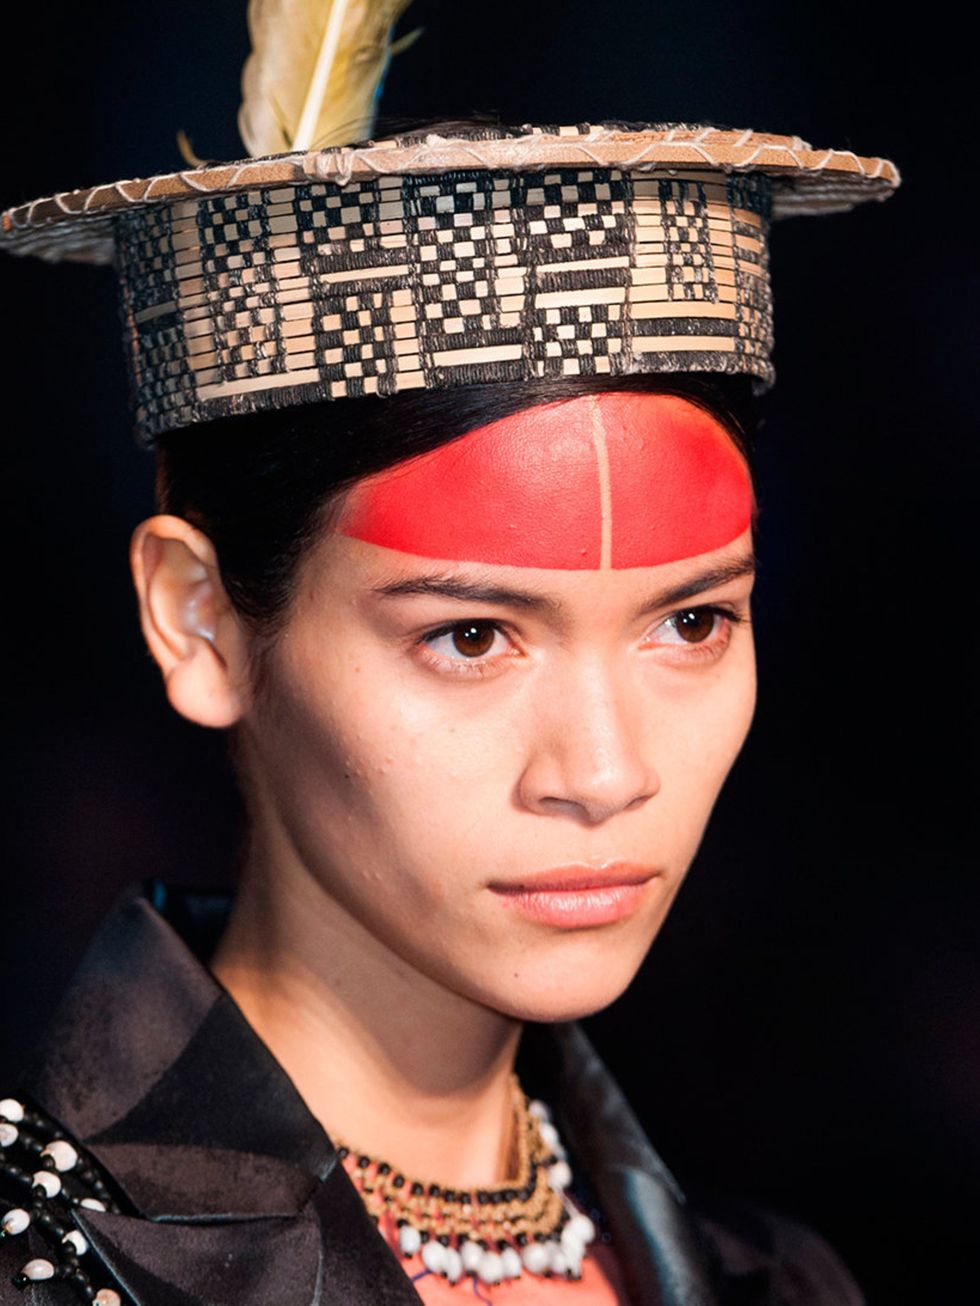 &lt;p&gt;Make-up Artist: Val Garland for Mac&lt;/p&gt;&lt;p&gt;Look: Tribal&lt;/p&gt;&lt;p&gt;Inspiration: The Ashaninka tribe&lt;/p&gt;&lt;p&gt;Tip: In no ways wearable, this is out-there catwalk make-up at its best!&lt;/p&gt;